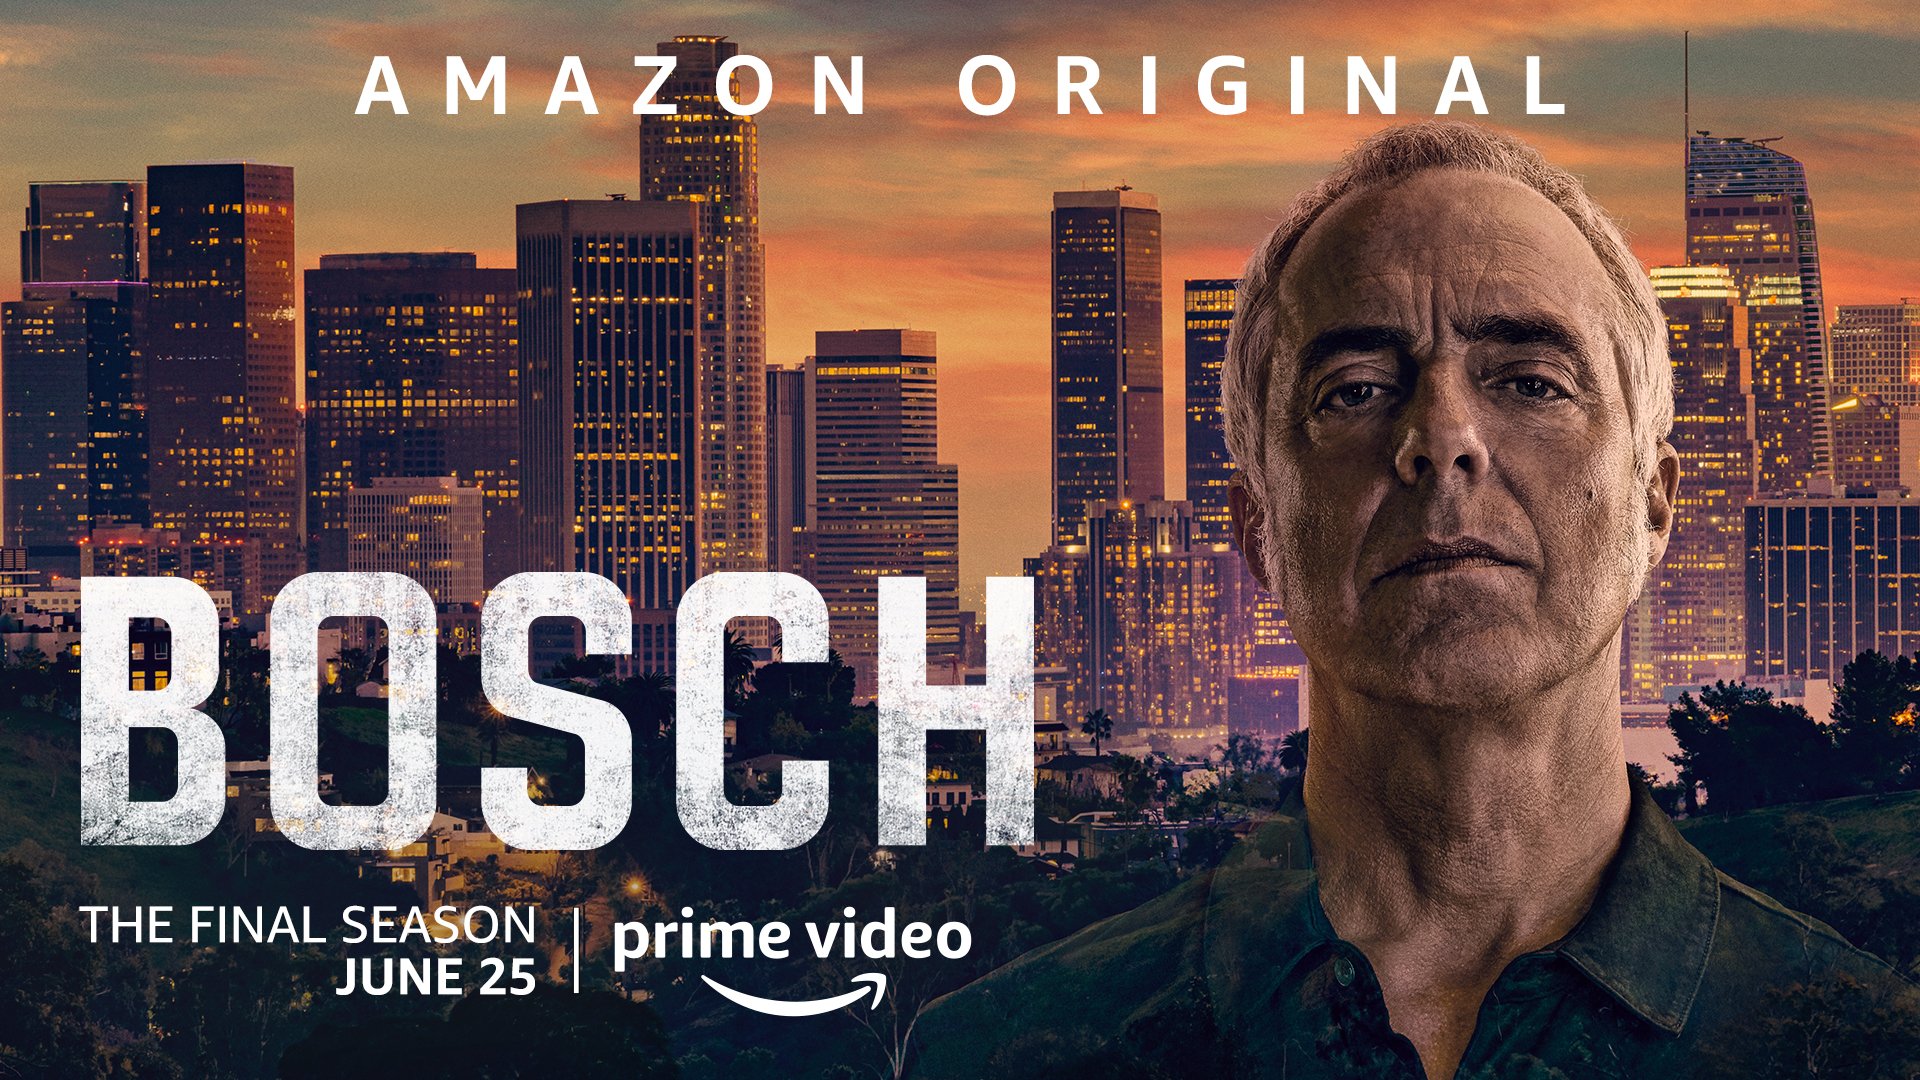 Titus Welliver stars as Harry Bosch in Amazon Prime's 'Bosch' in this original key art for promotion. Harry looks straight into the camera with Hollywood sights behind him.